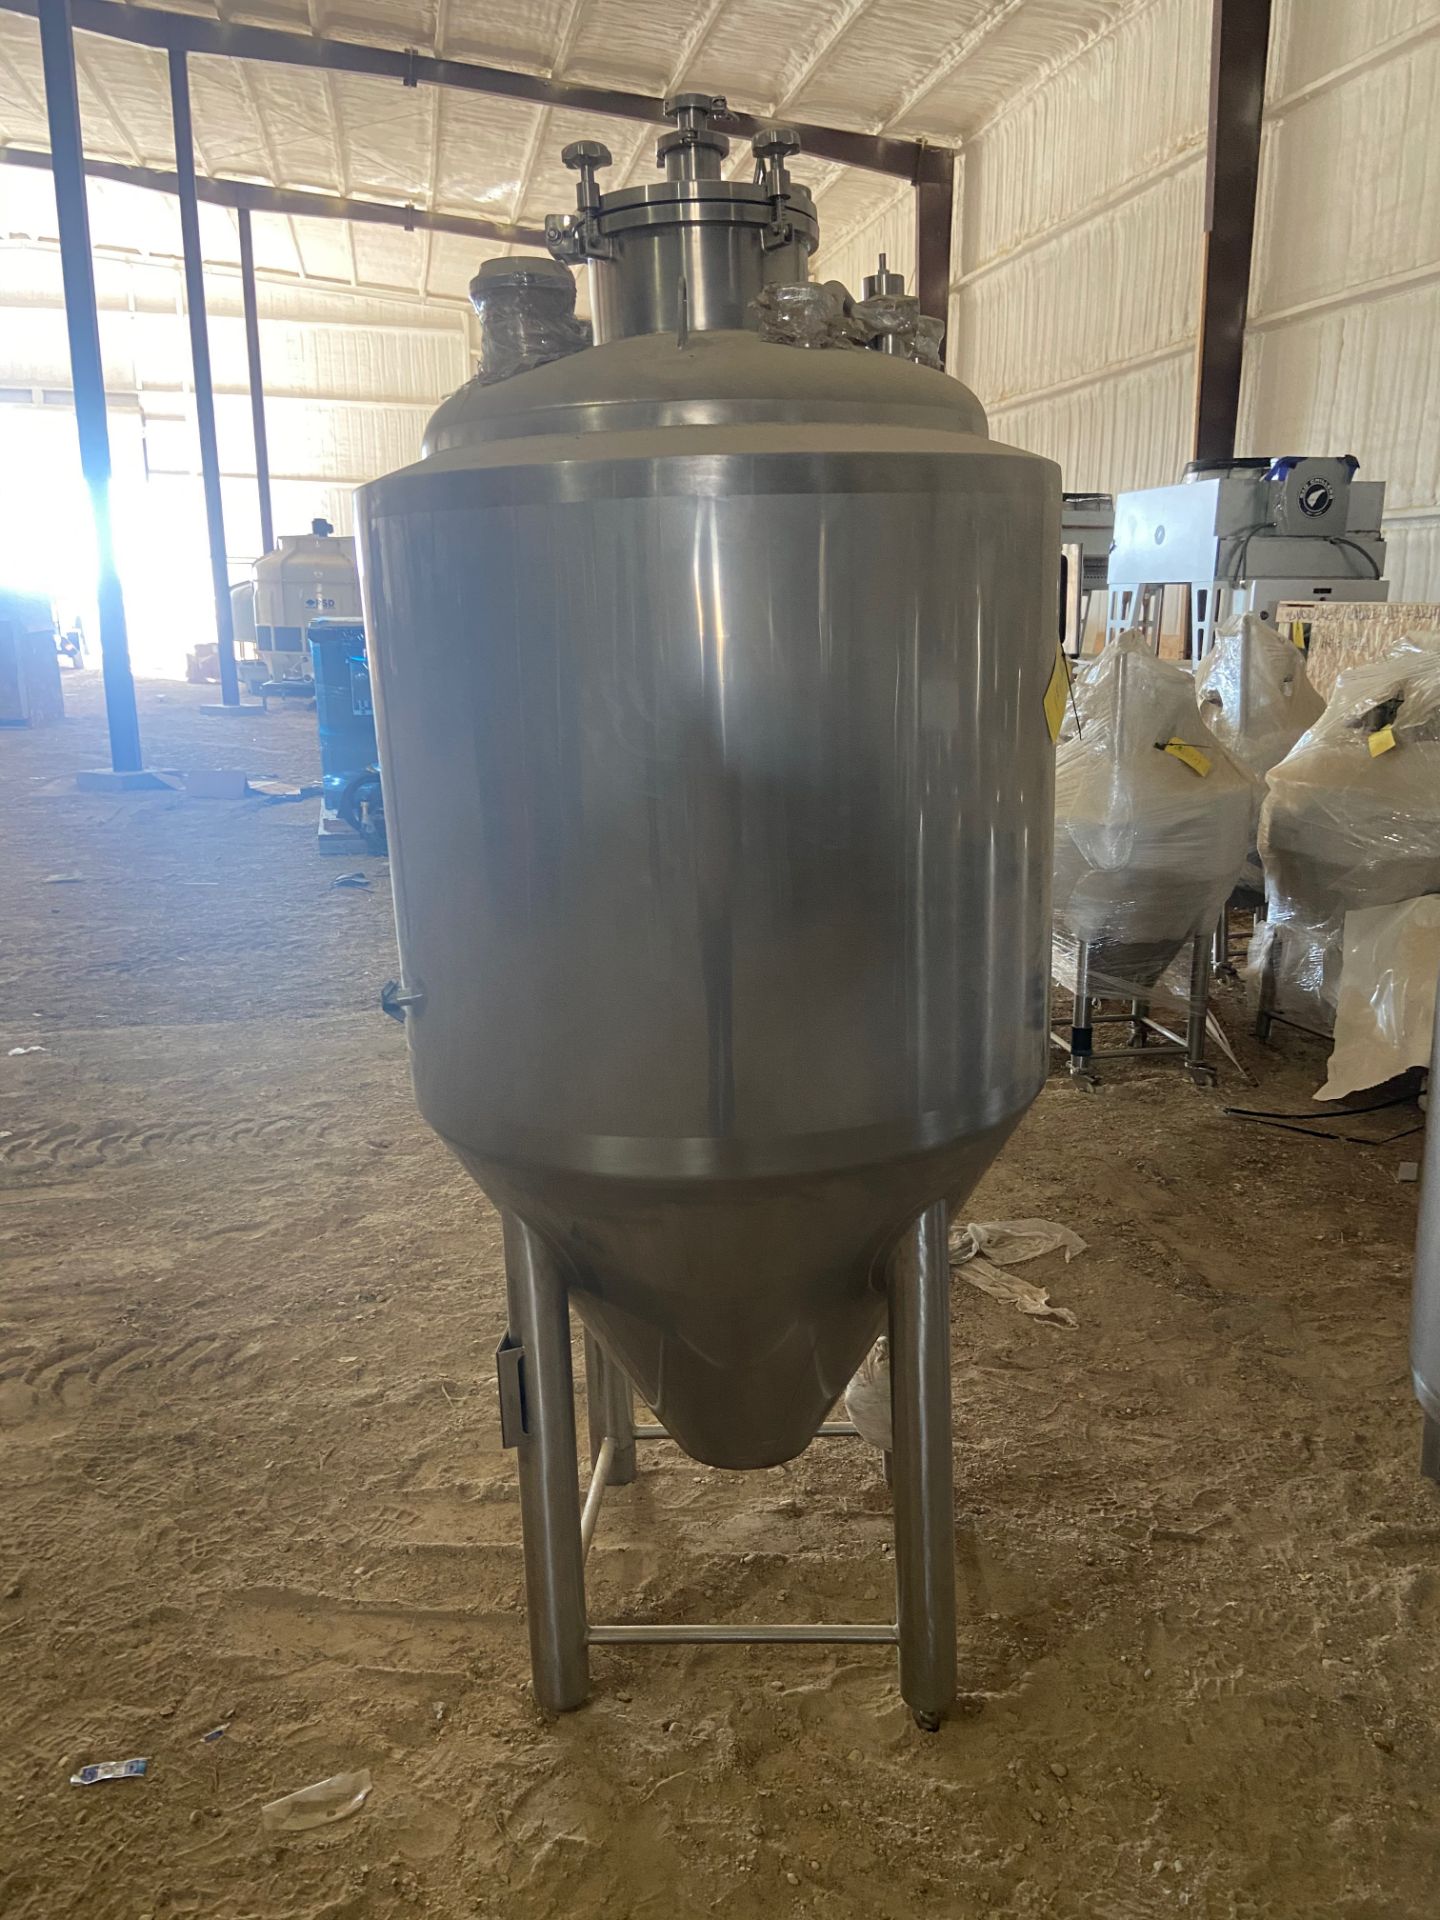 NEW Krones/ Cedarstone Industry Stainless Steel Jacketed Fermentation Tank, 4 BBL, Serial# CS19-48, - Image 6 of 9